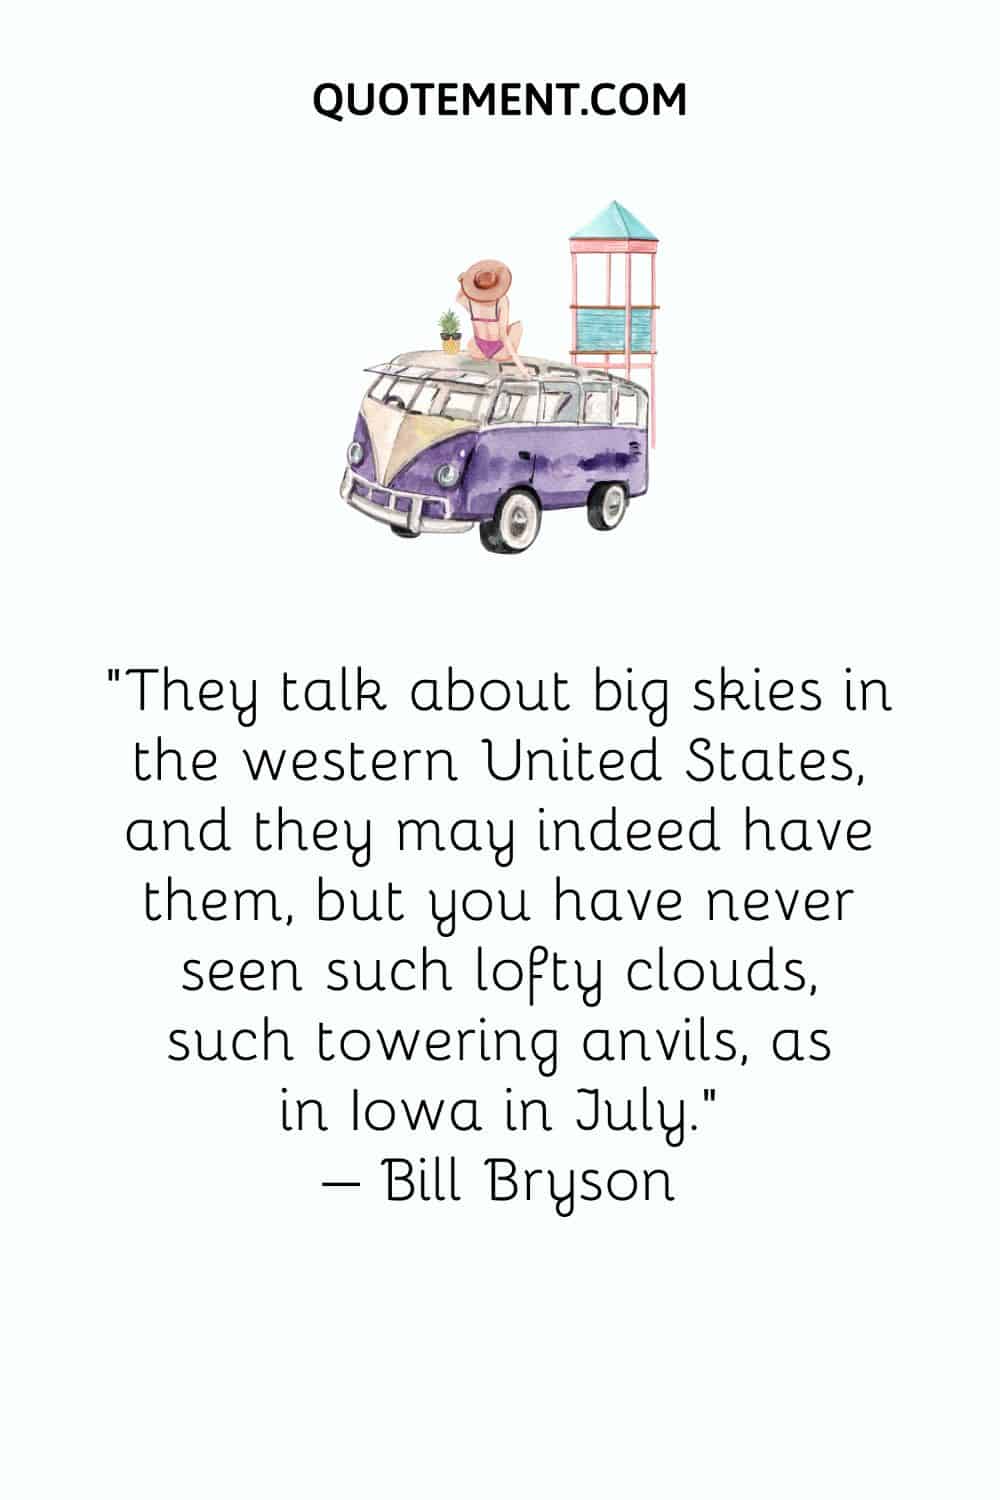 They talk about big skies in the western United States, and they may indeed have them, but you have never seen such lofty clouds, such towering anvils, as in Iowa in July. – Bill Bryson